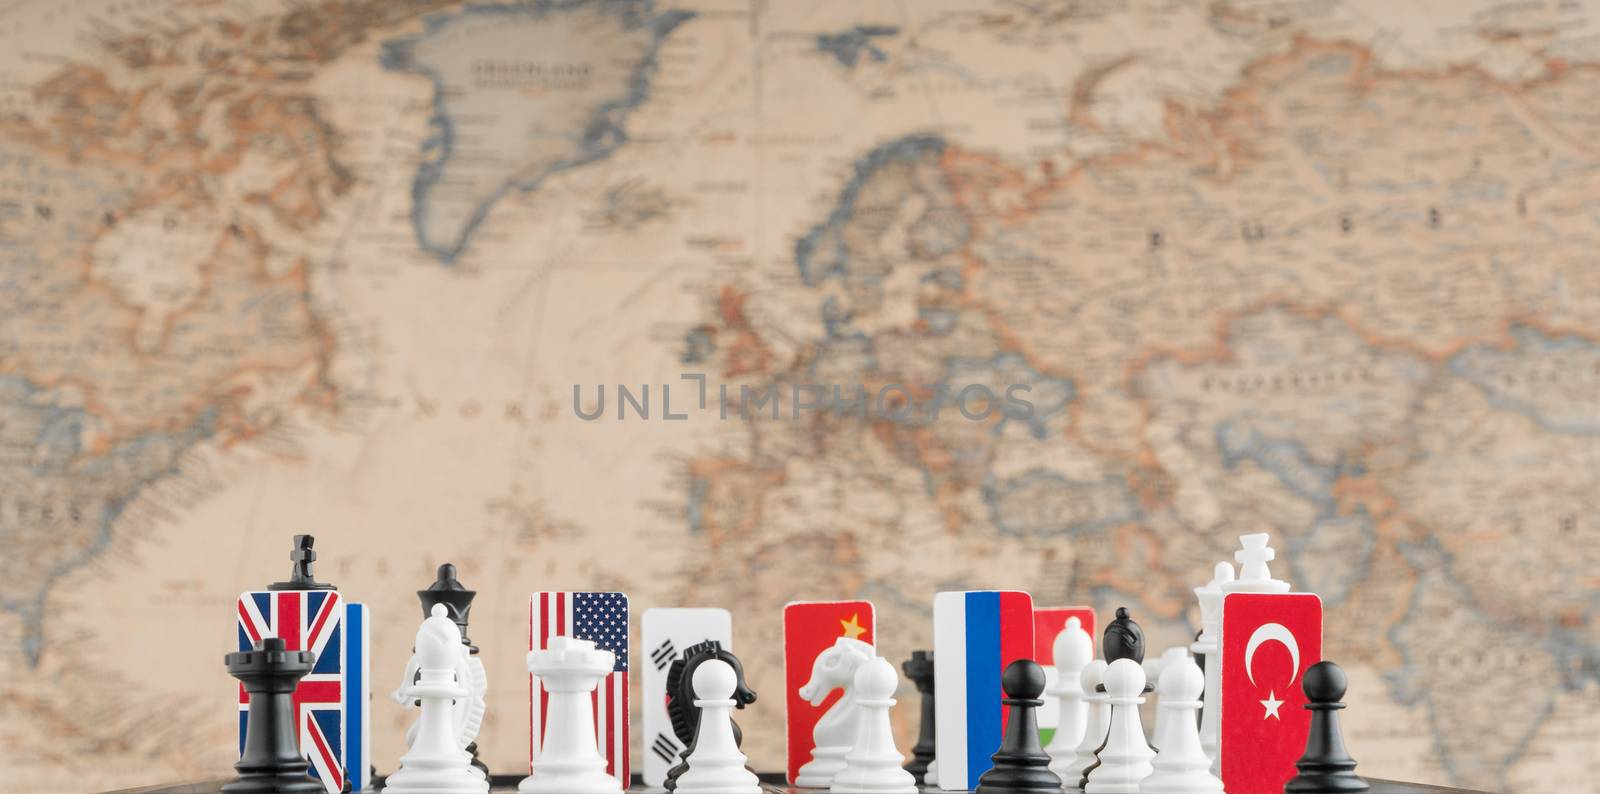 Country flag symbols on the chessboard with figures on the background of the political map of the world. Conceptual photo of a political game.